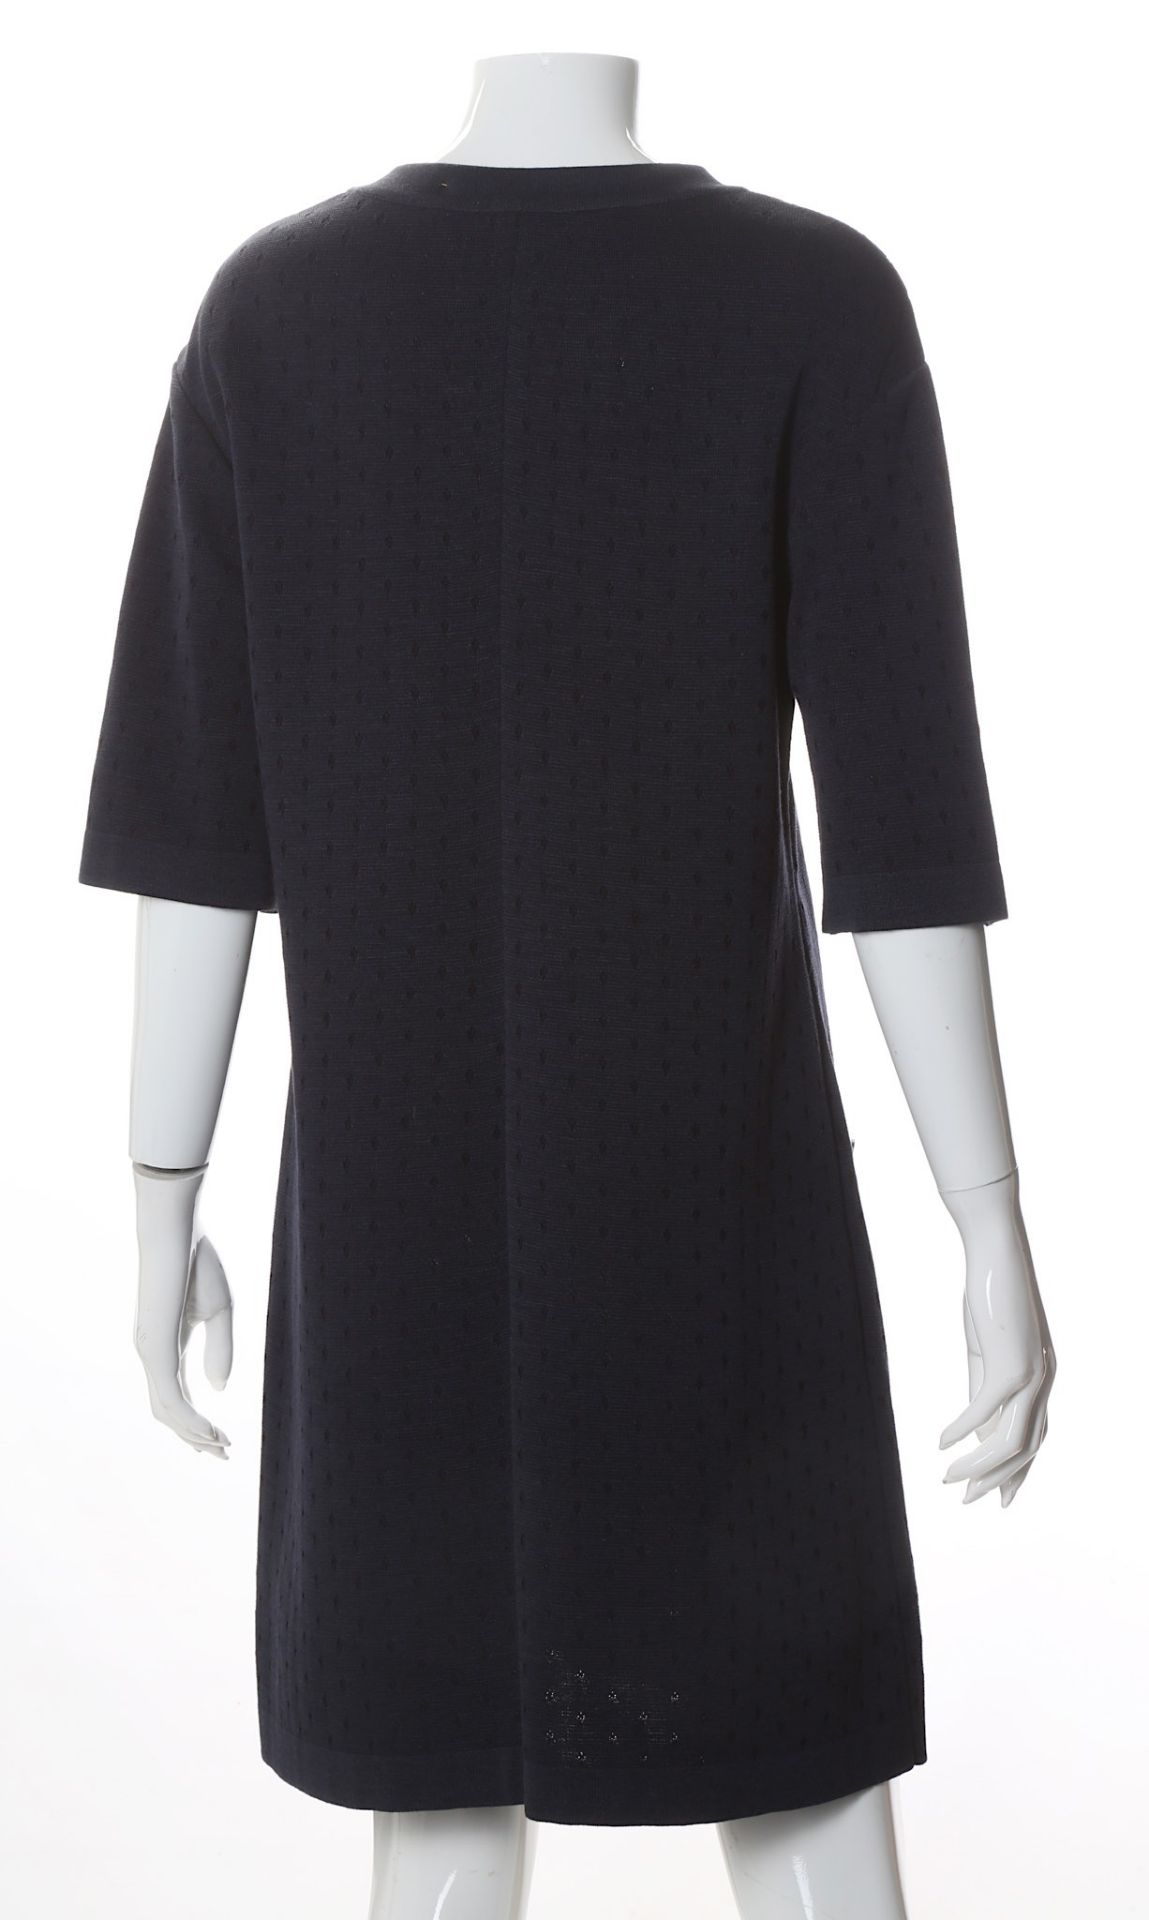 Chanel Midnight Blue Cotton and Silk Mix Dress, sh - Image 4 of 4